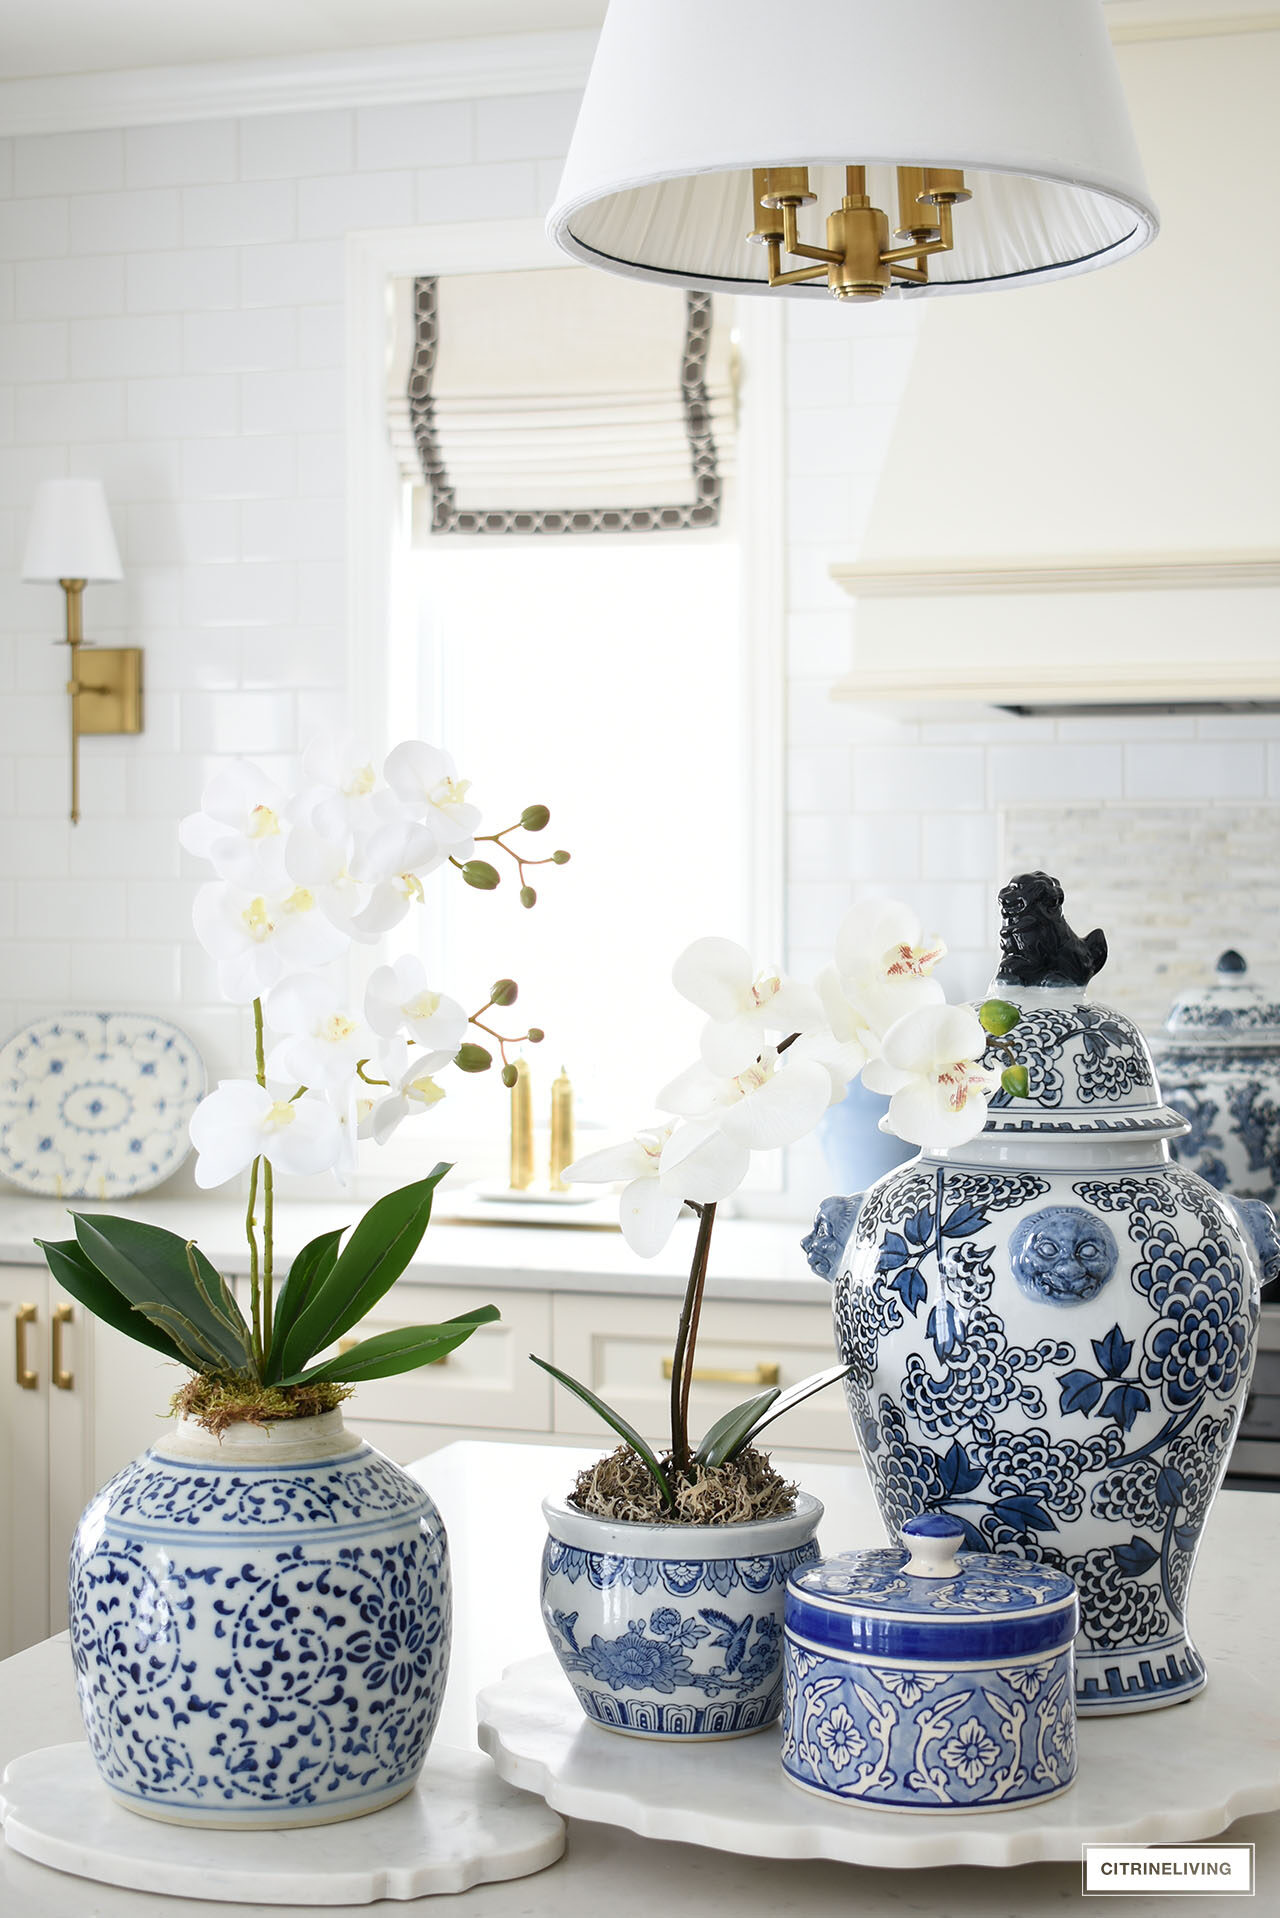 Kitchen island decorated with blue and white ginger jars and orchids.